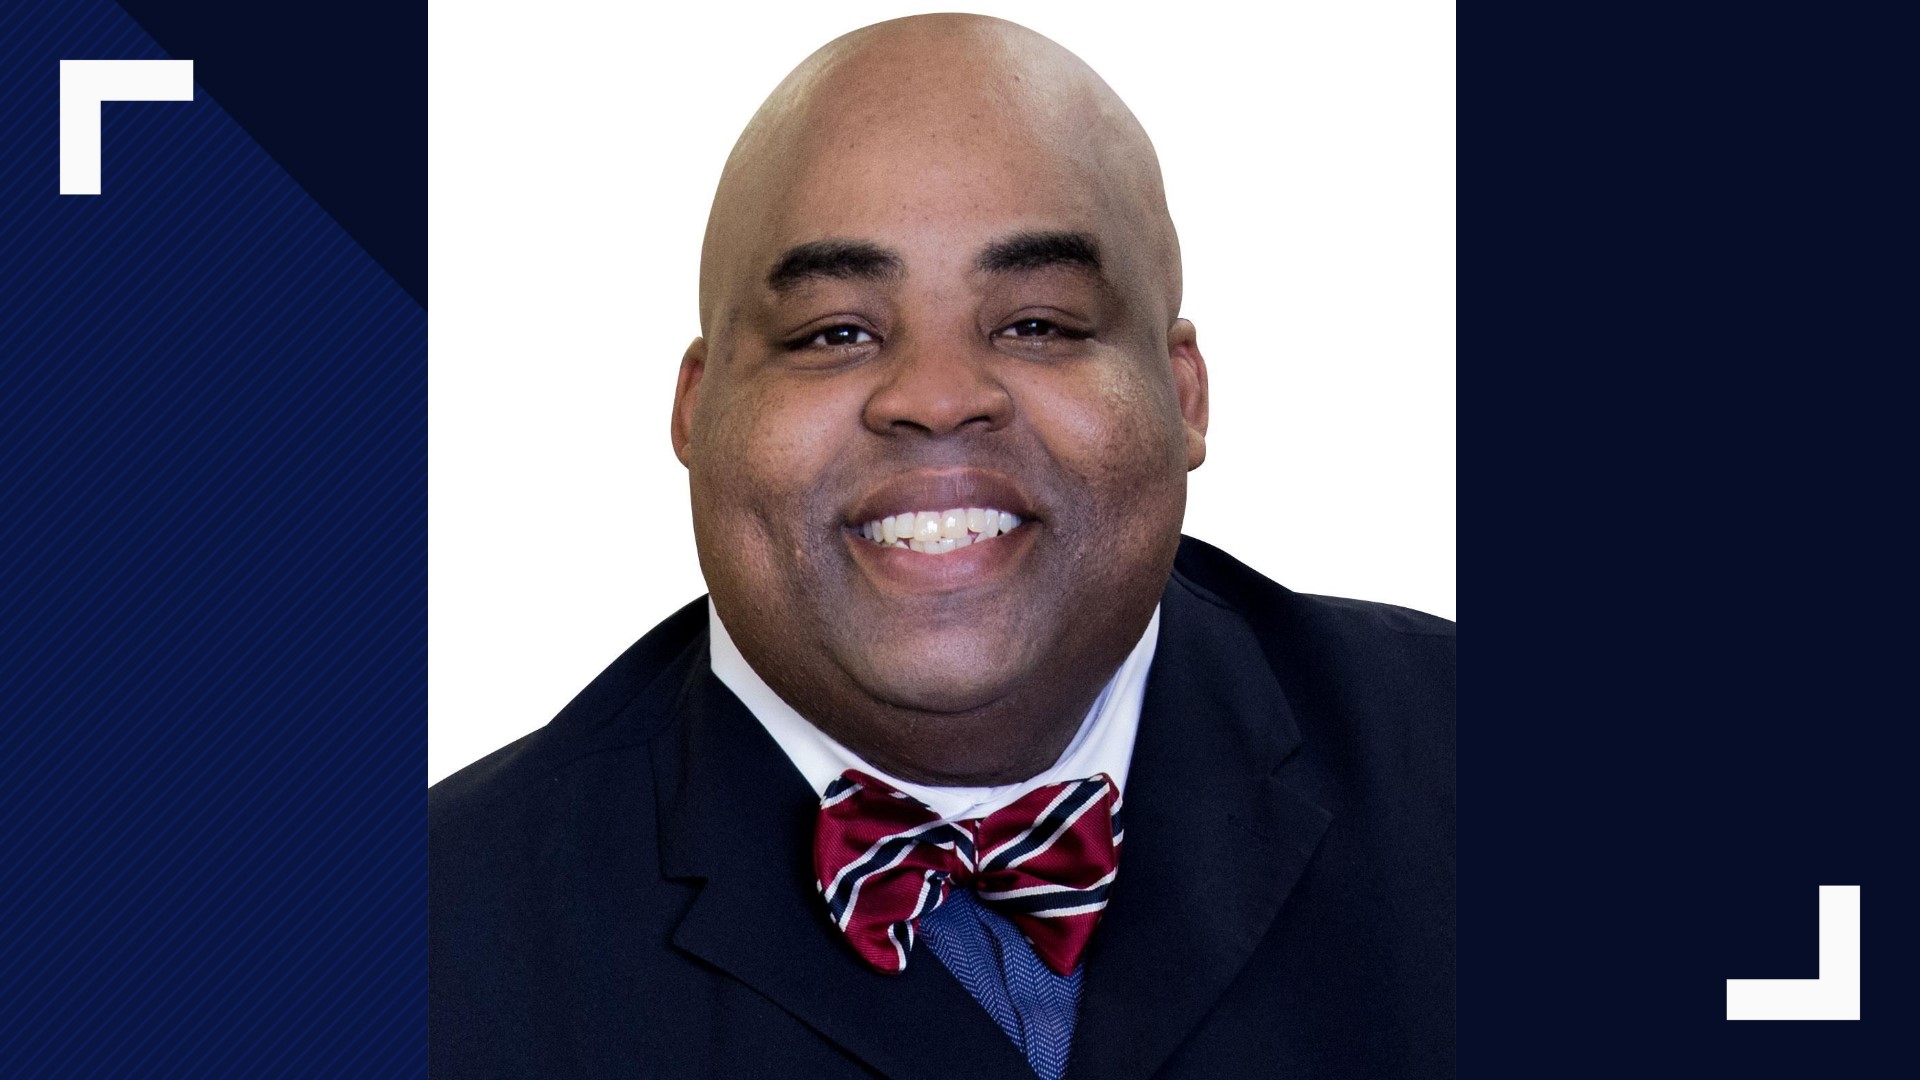 Marlin ISD is on the verge of closing, according to City Manager Cedric Davis. A charter school is a possible option and a consultant would be needed.